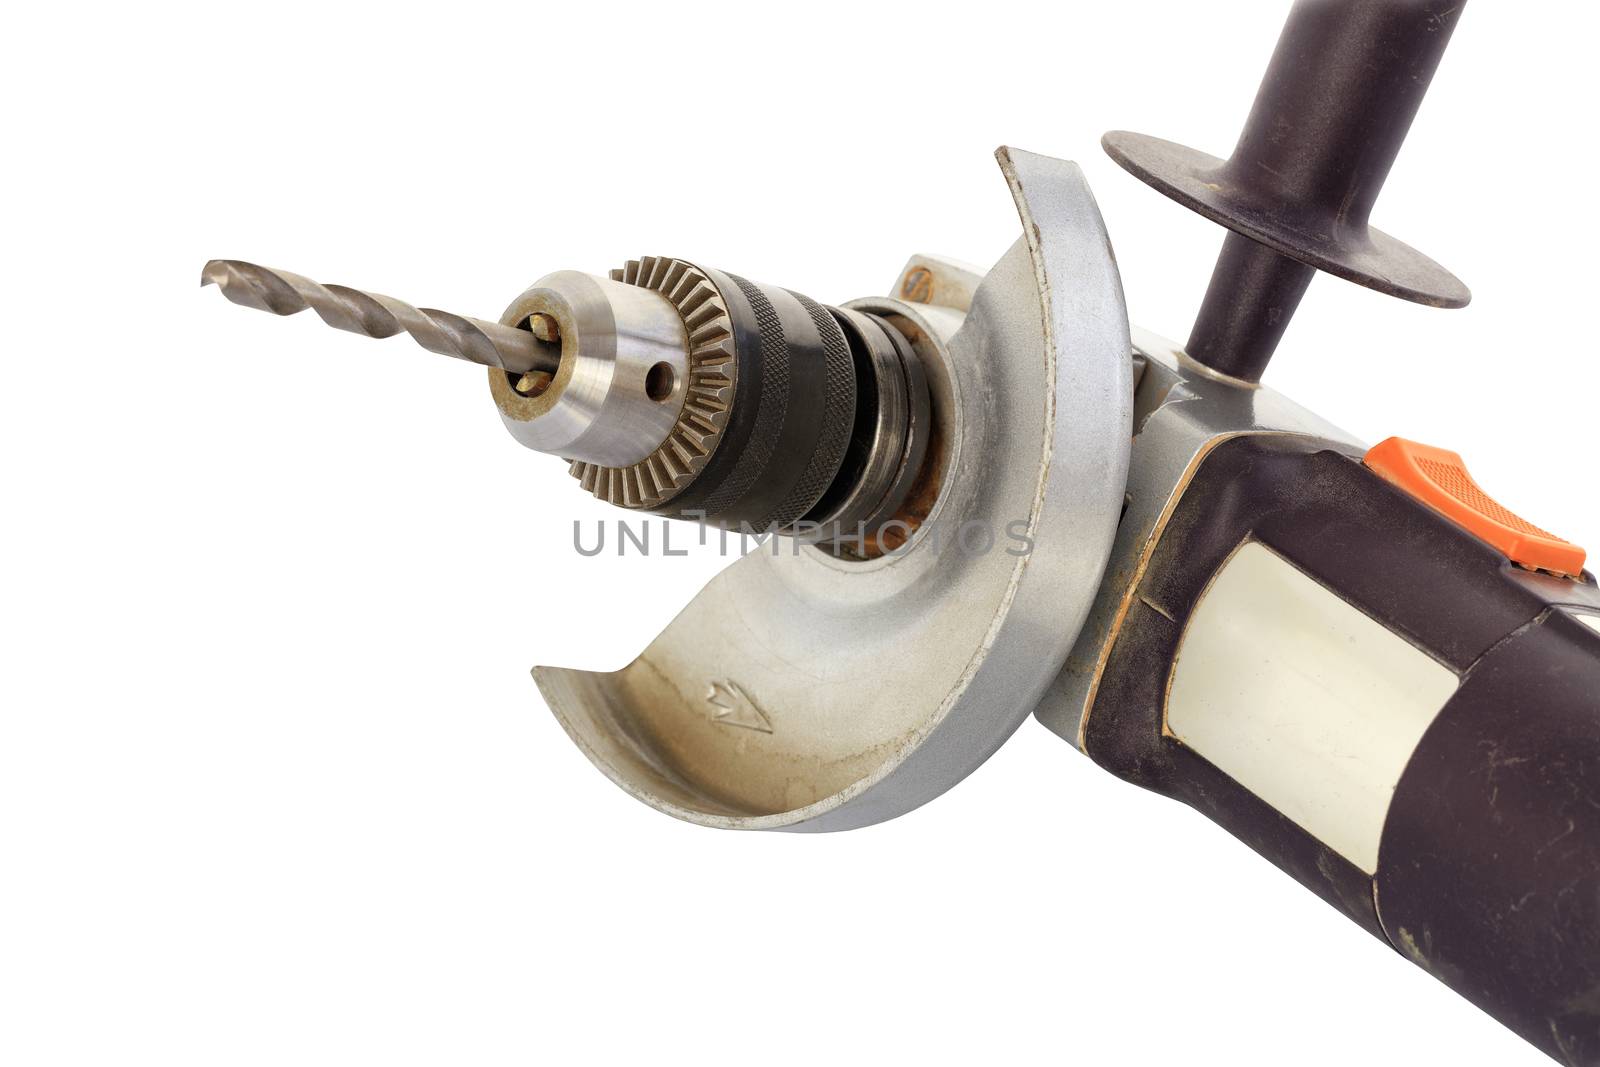 The original solution, the old angle grinder, is used as a drill with a metal chuck and drill bits, isolated on a white background.